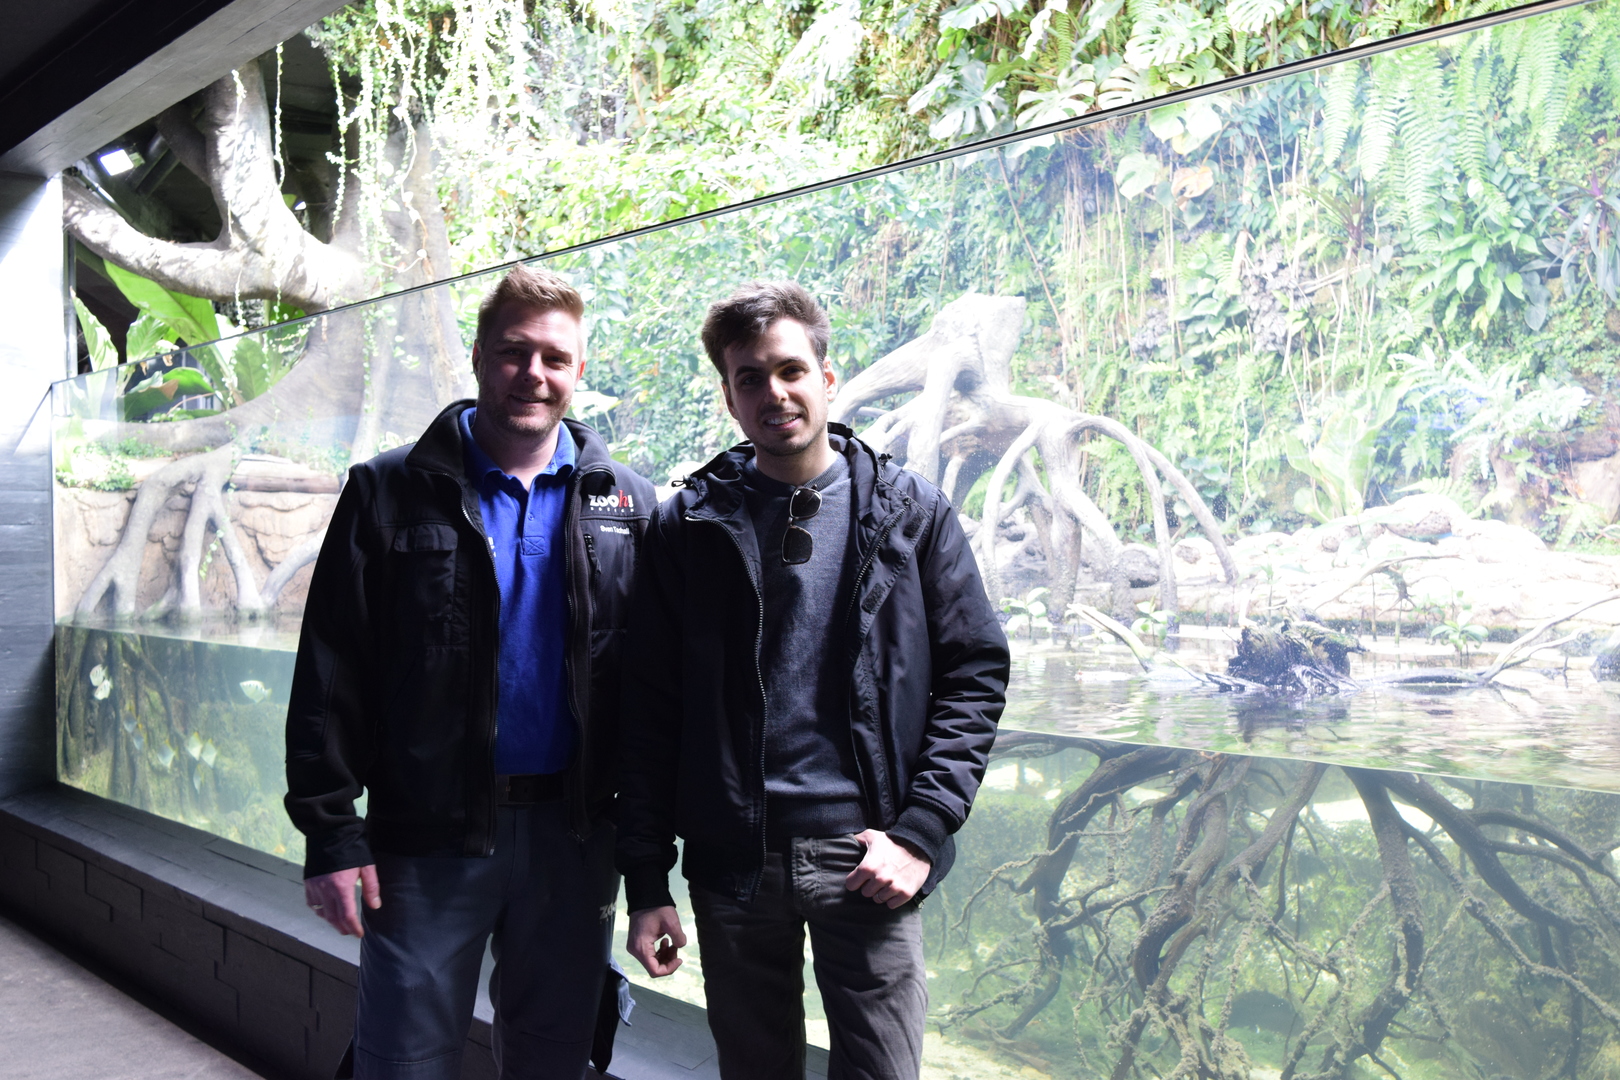 Sven Tschall & me (Simone D'Archino) in front of the Brackish water aquarium